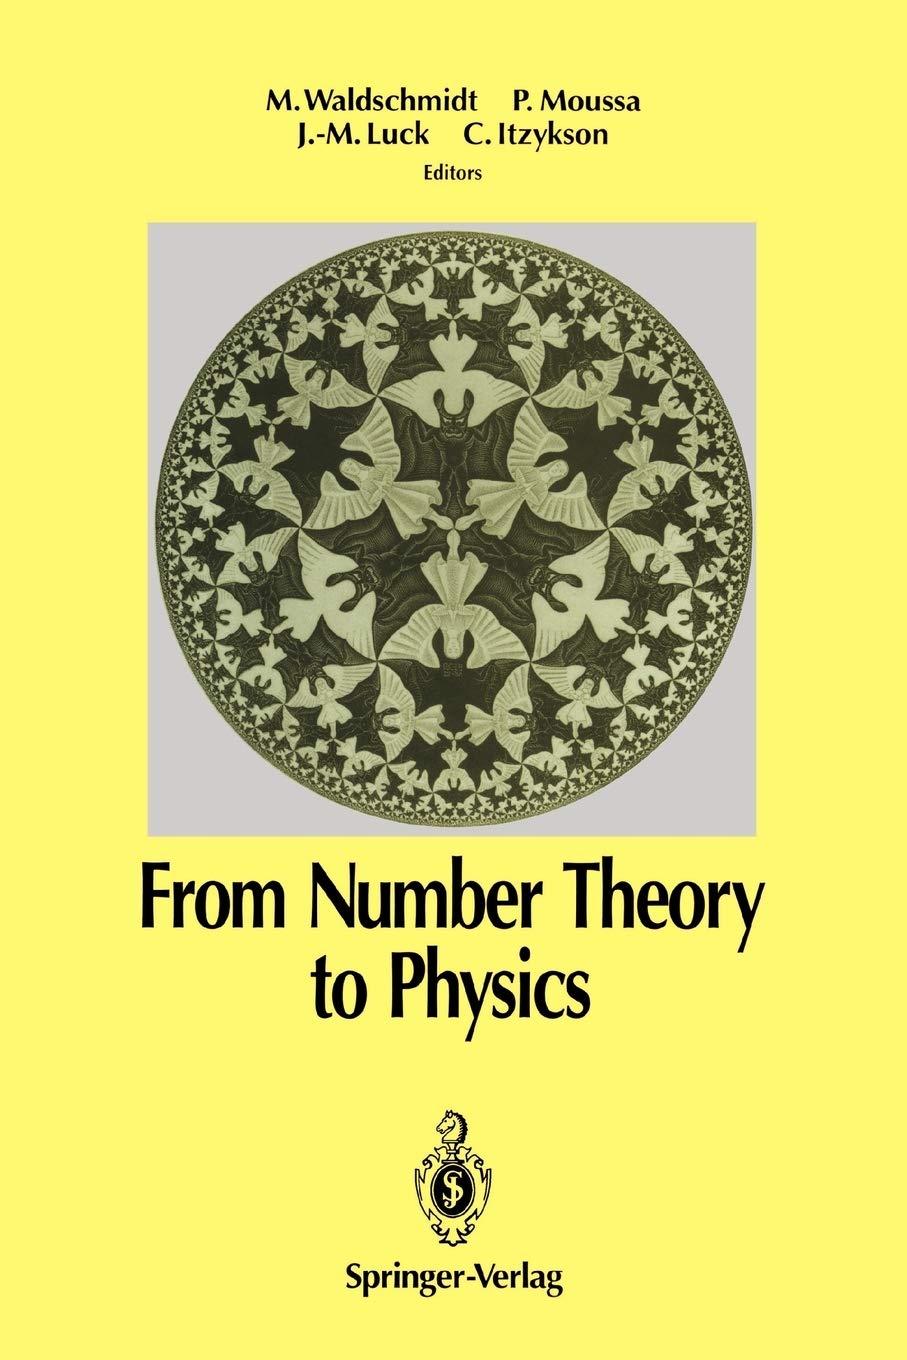 from number theory to physics 1st edition michel waldschmidt, pierre moussa, jean-marc luck, claude itzykson